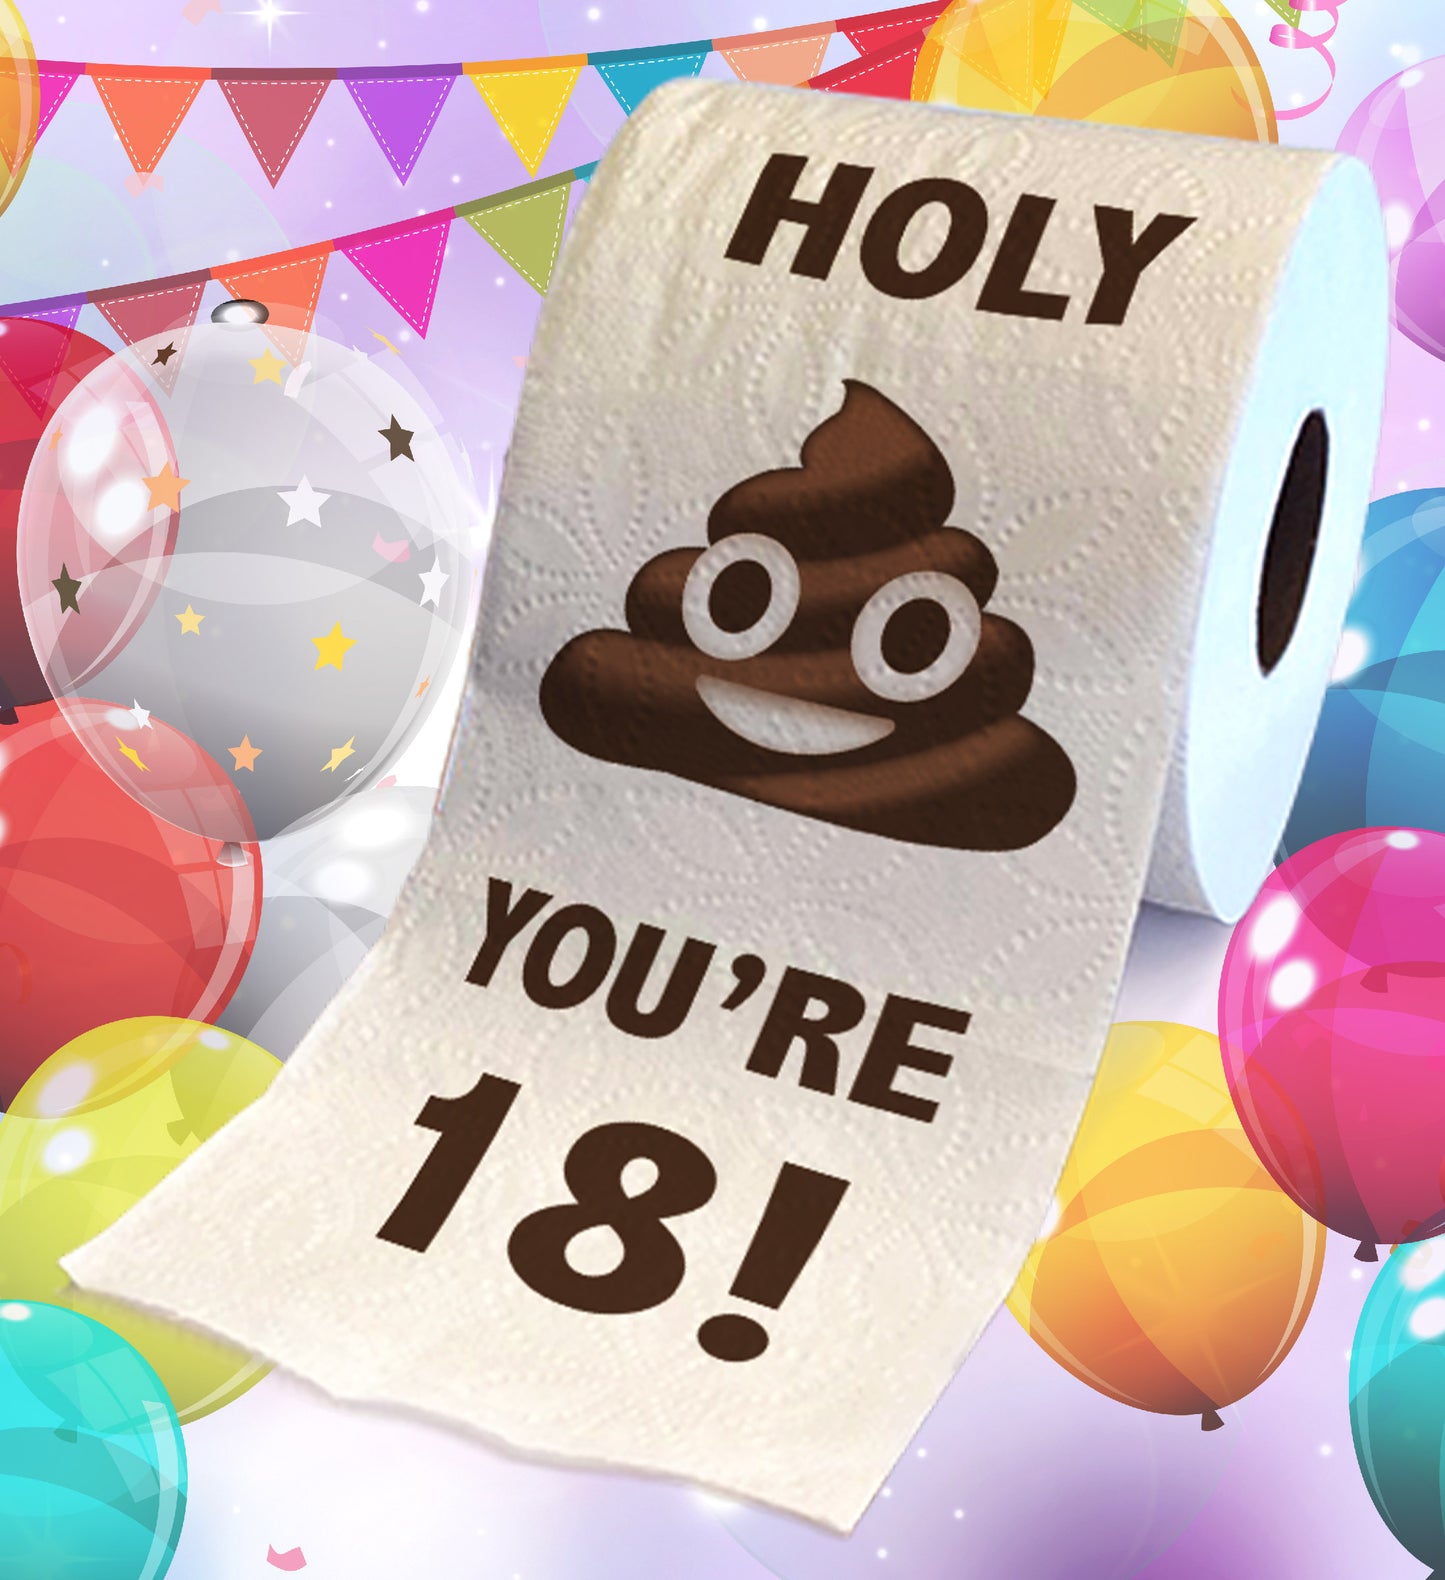 Printed TP Holy Poop You're 18 Funny Toilet Paper Roll Birthday Party Gag Gift